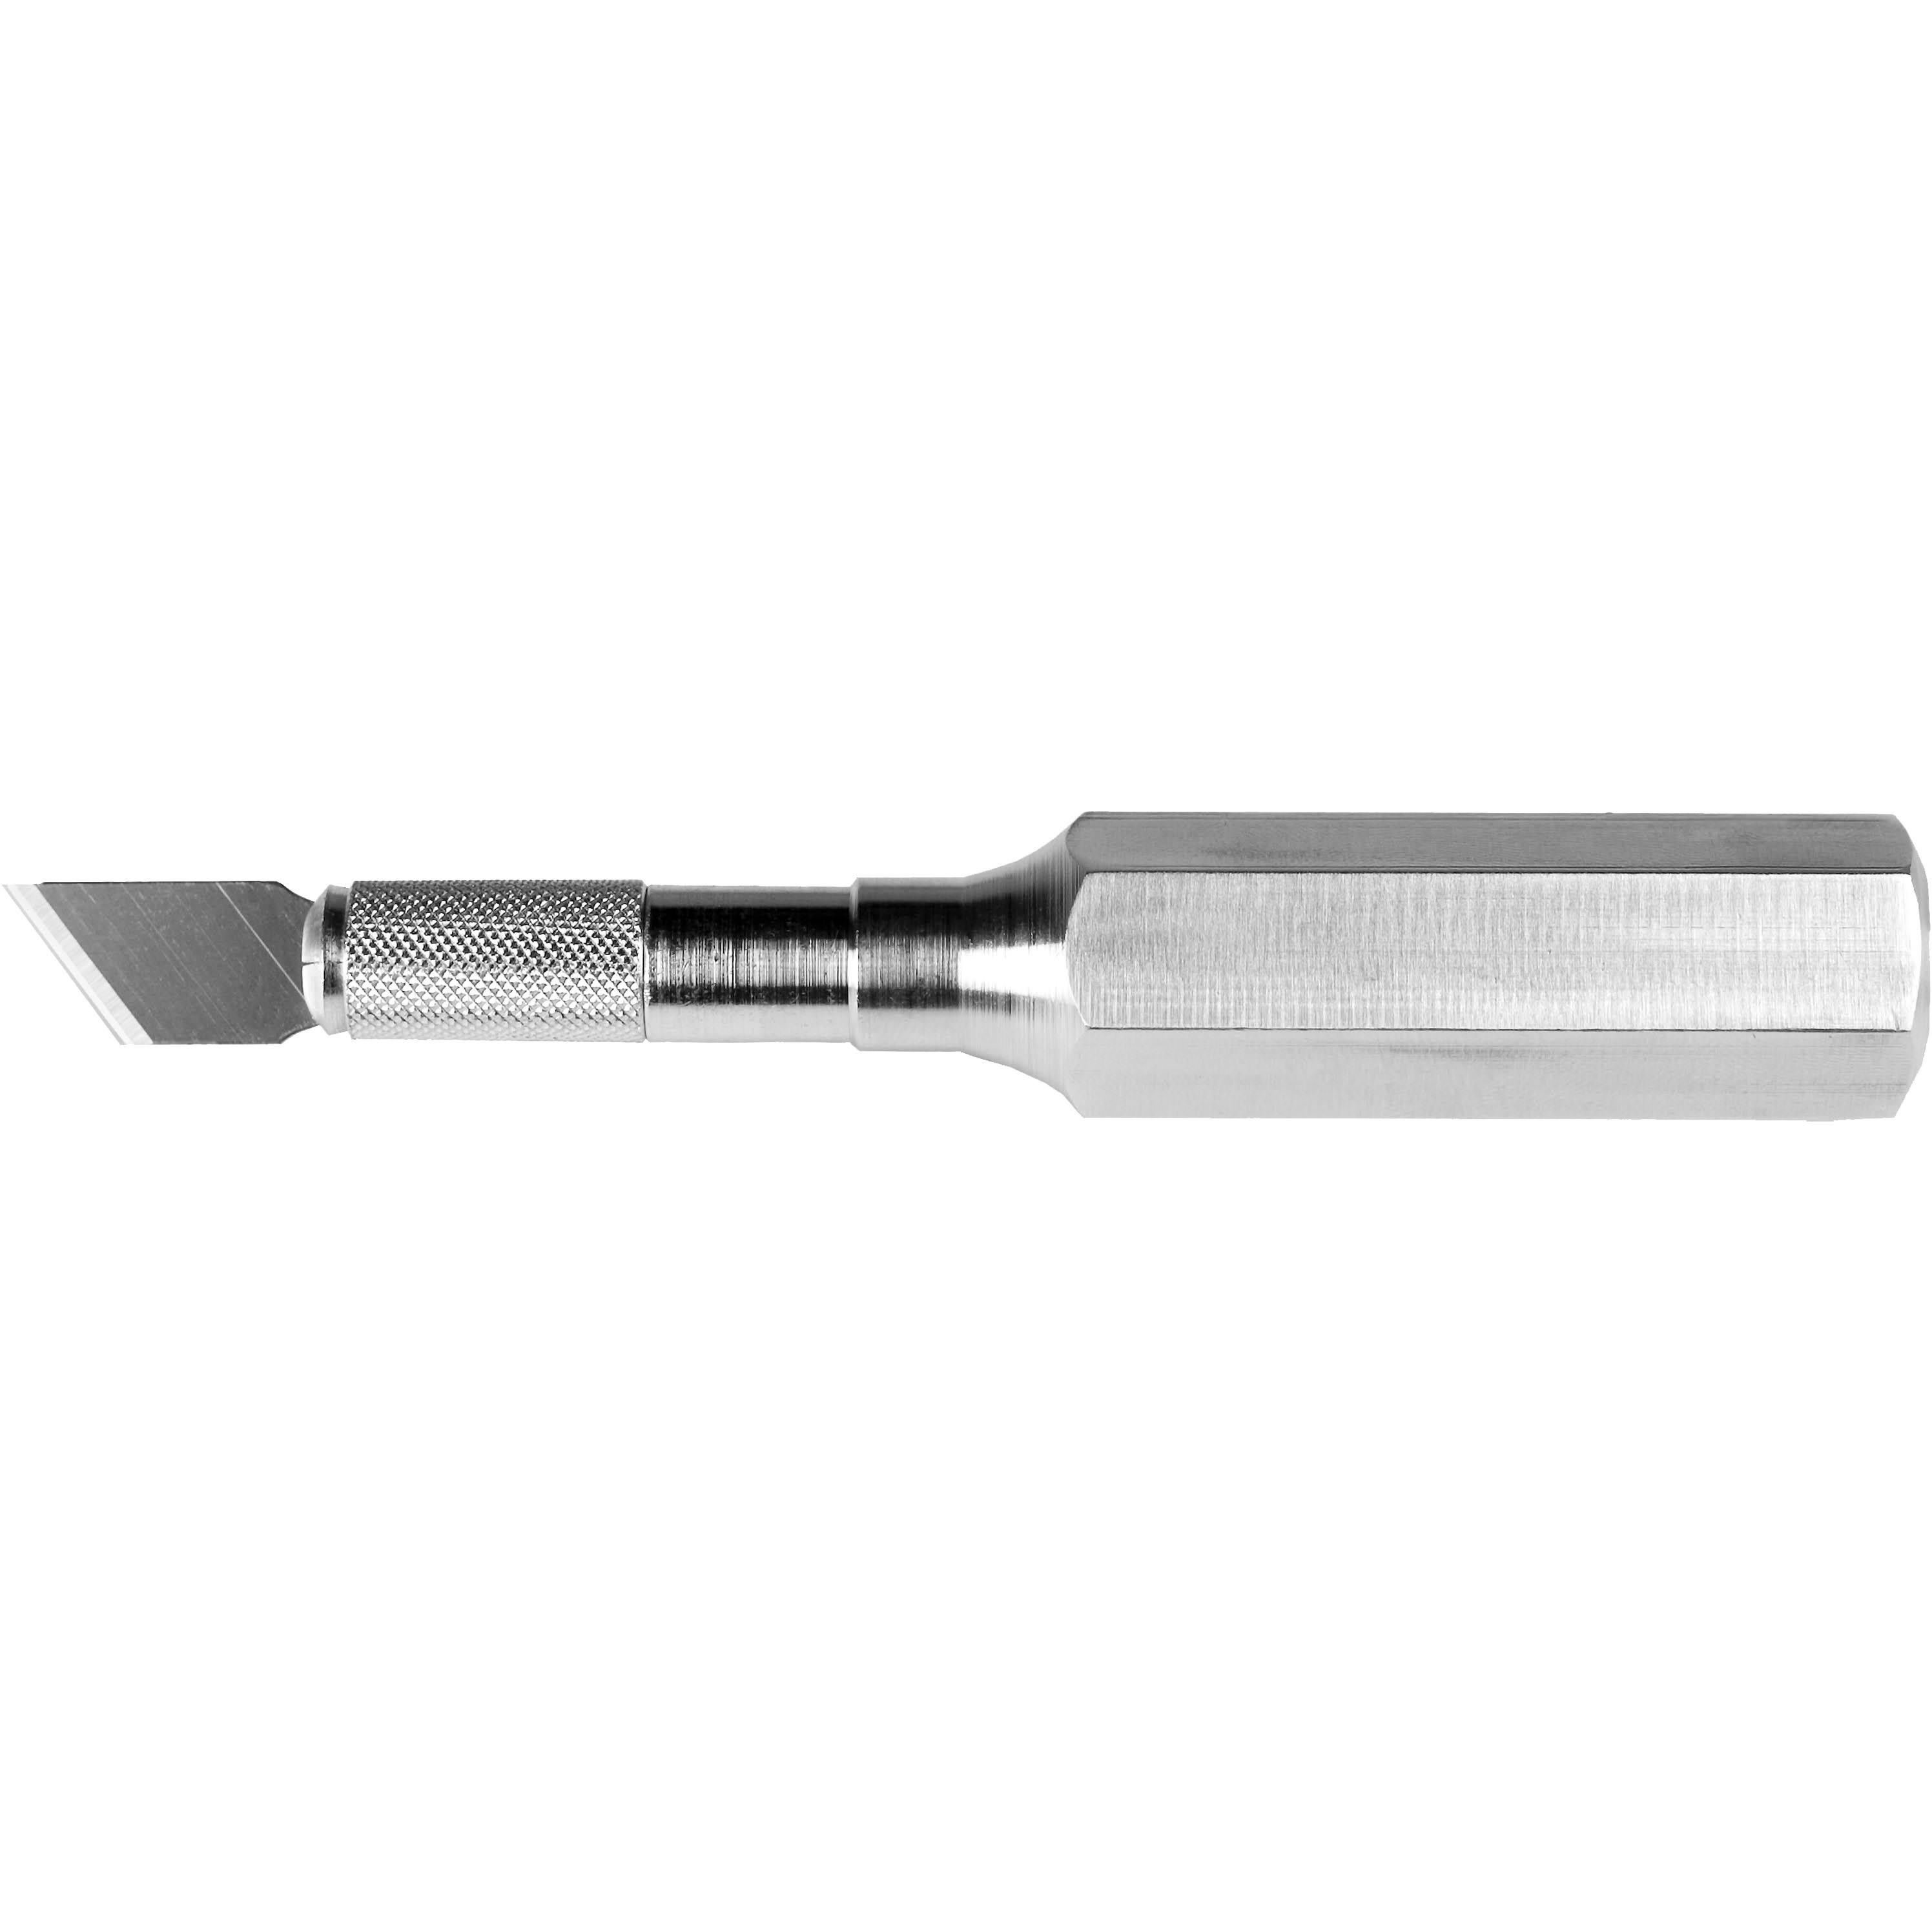 Excel Blades K6 Heavy Duty Hobby Knife with Safety Cap